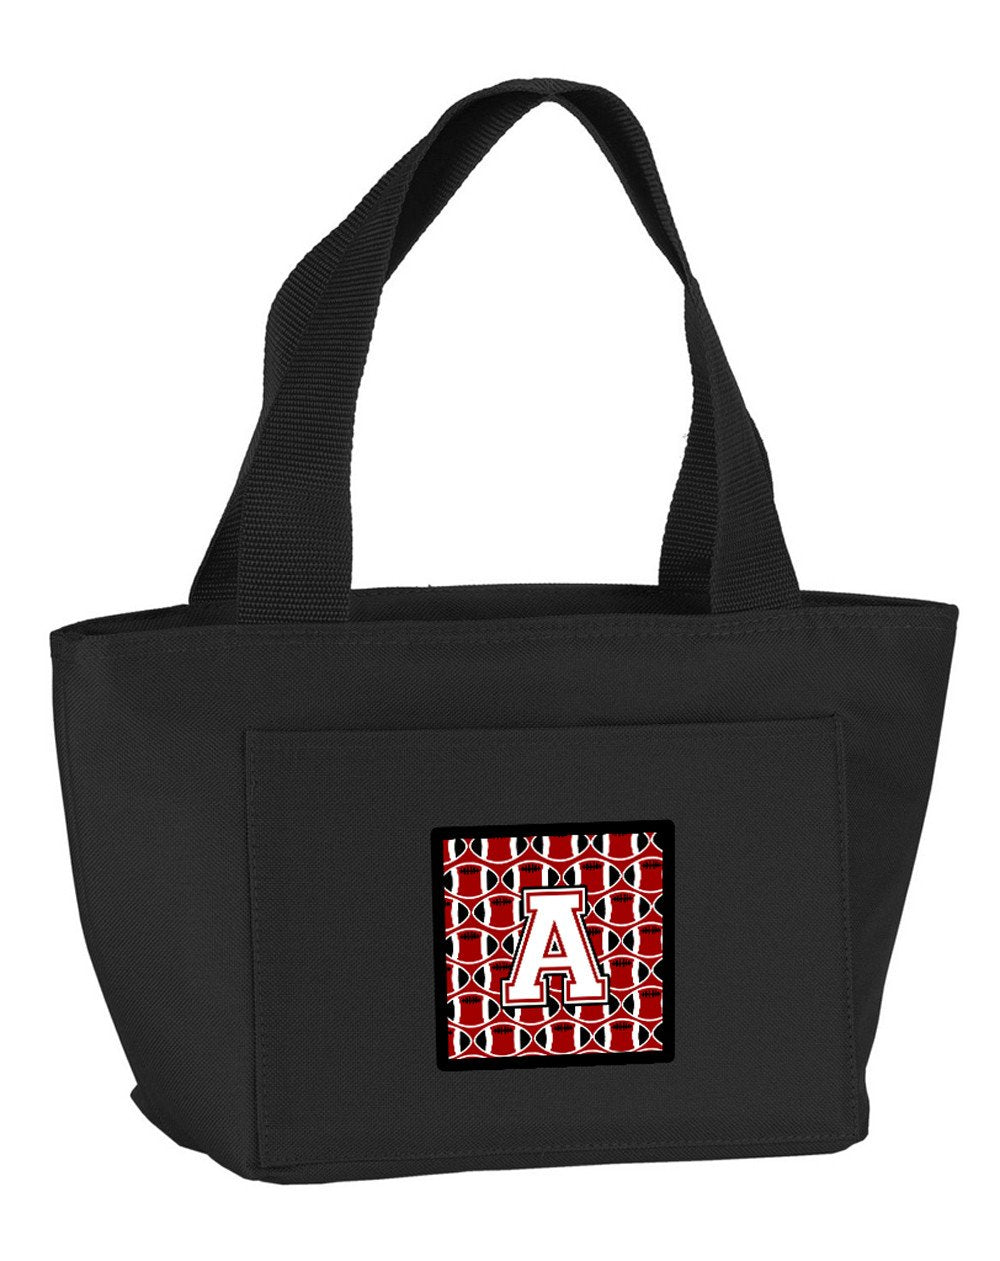 Letter A Football Cardinal and White Lunch Bag CJ1082-ABK-8808 by Caroline's Treasures